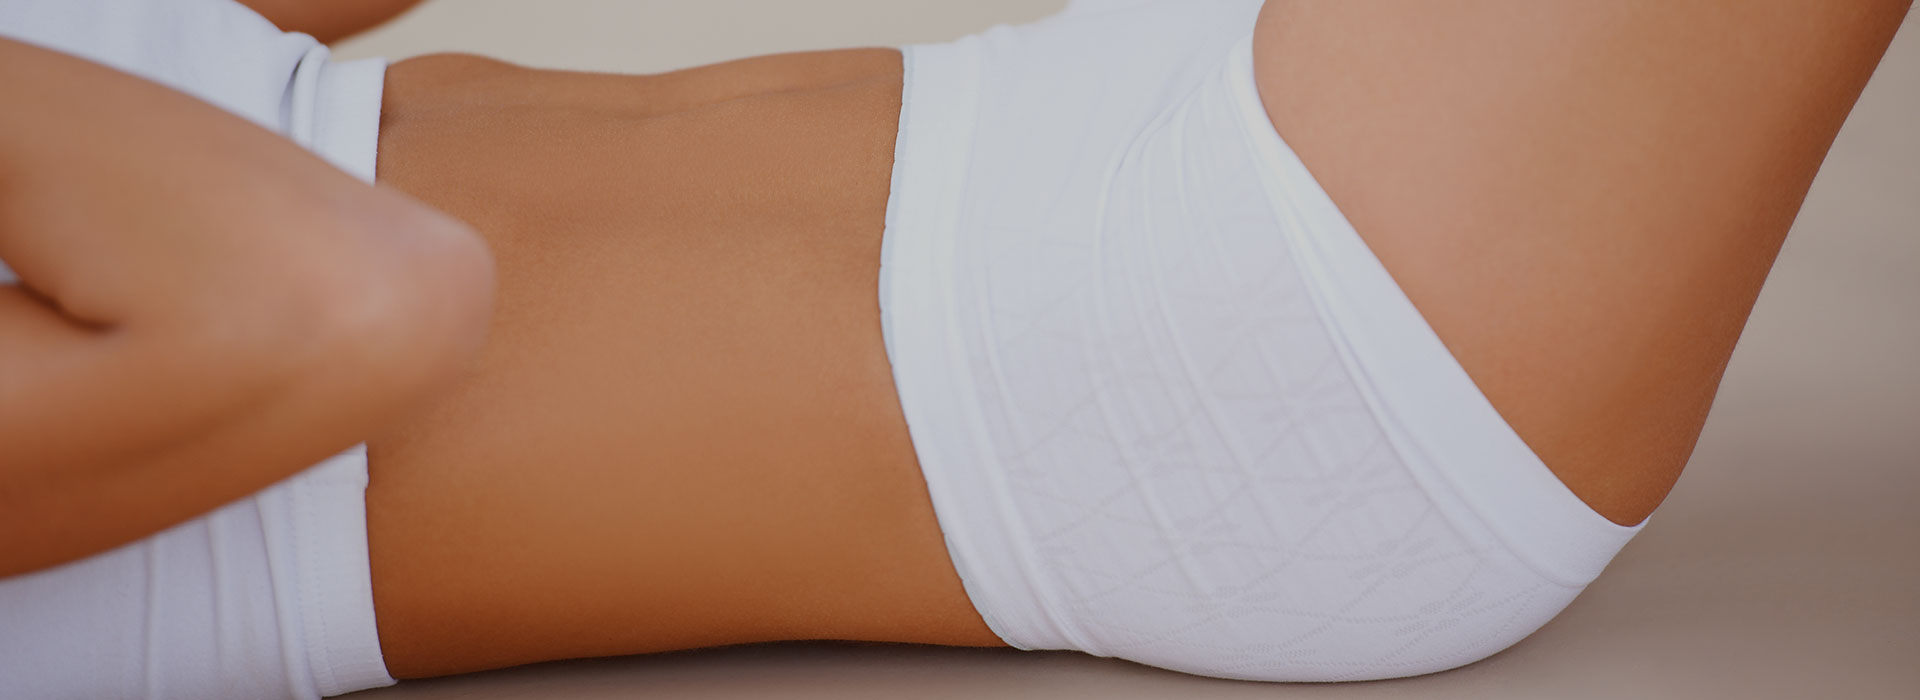 Chicago's Best Flank Fat Removal: Get Results Without Liposuction